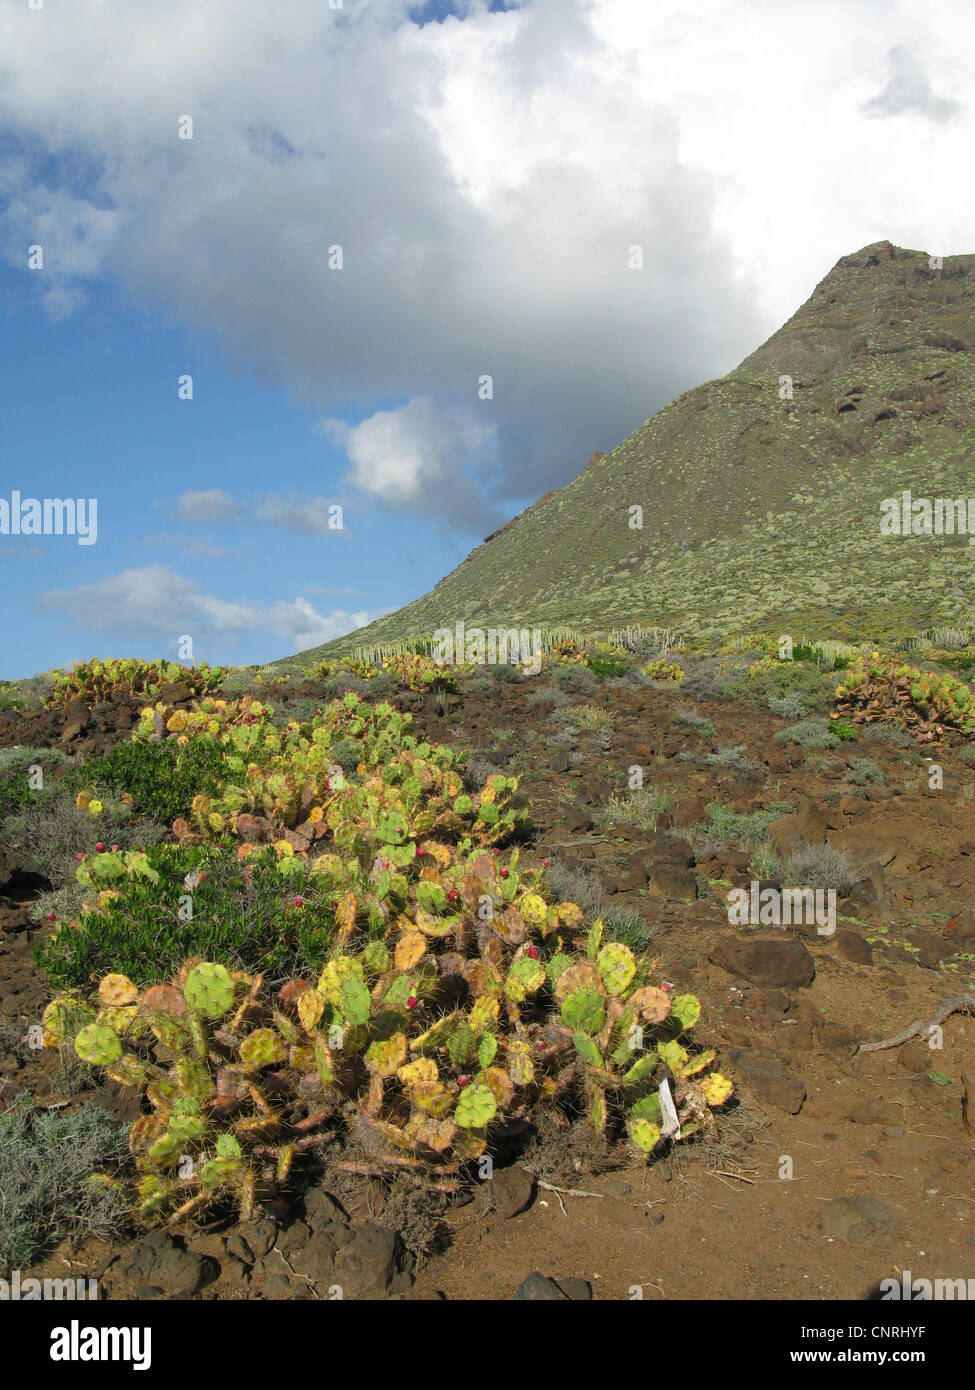 Prickly Pear (Opuntia dillenii), naturalized in the succulent shrub in the west, Canary Islands, Tenerife, Faro de Teno Stock Photo